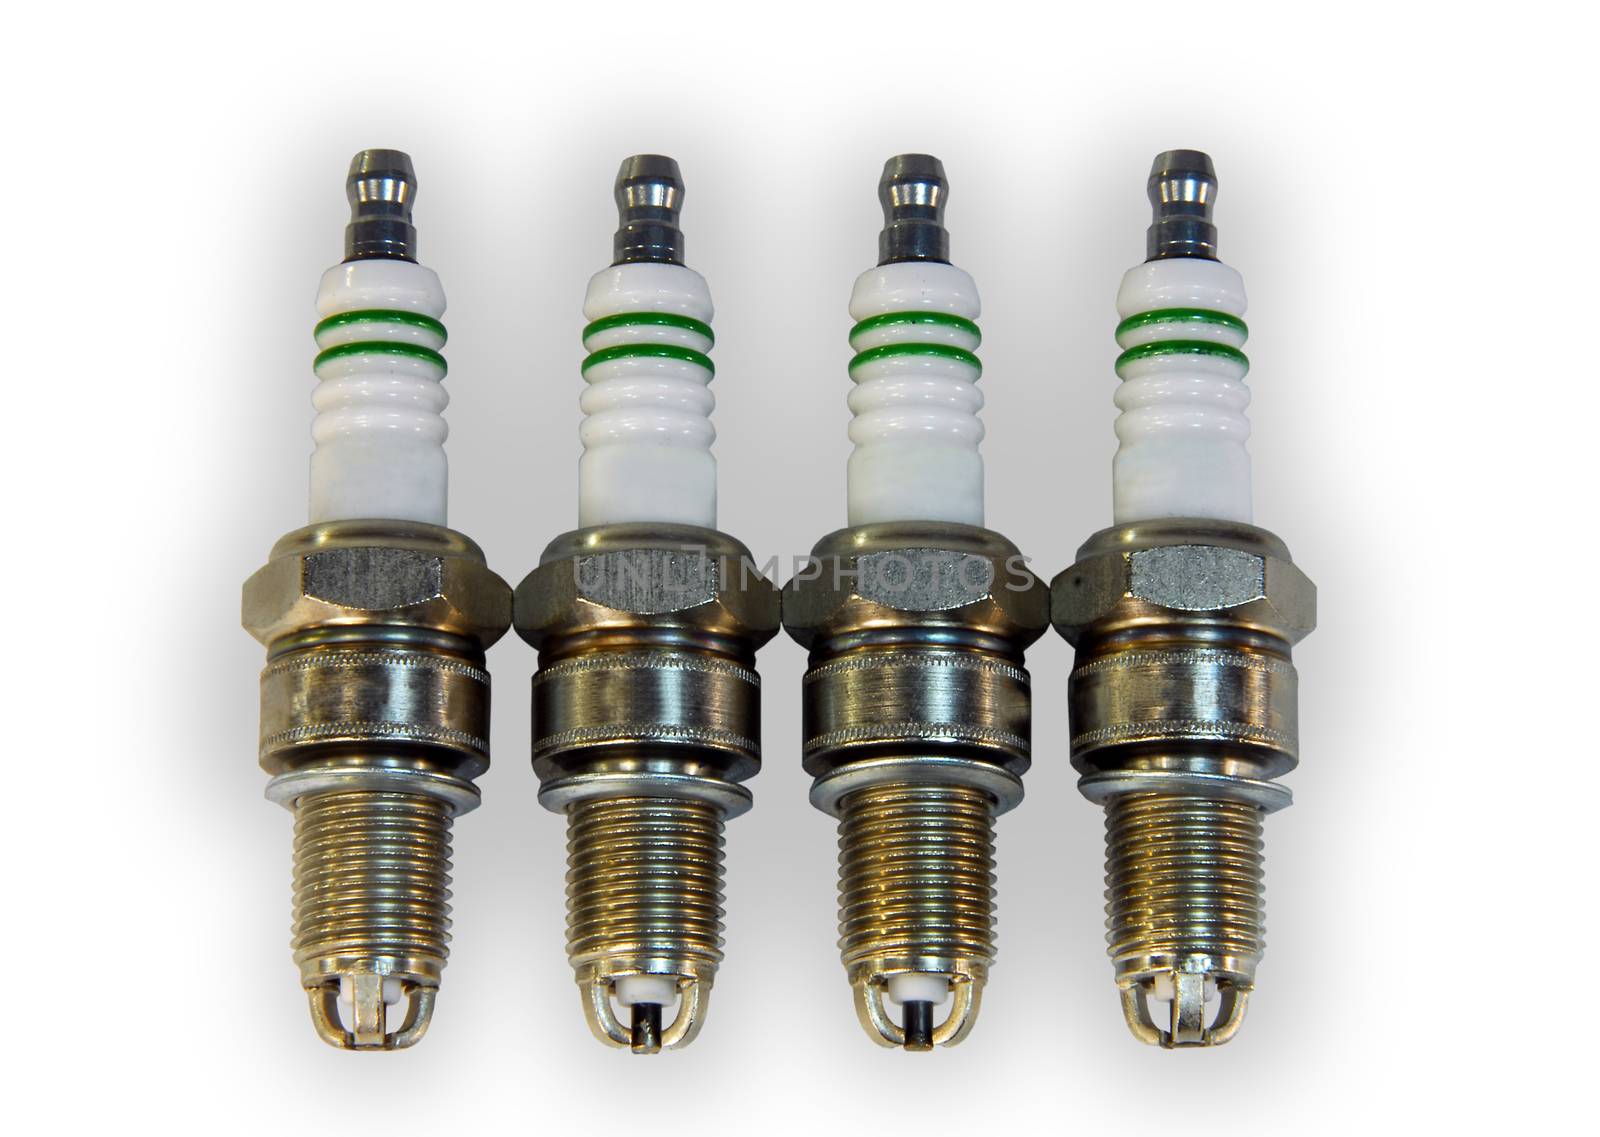 4 automobile spark plugs are on a white background